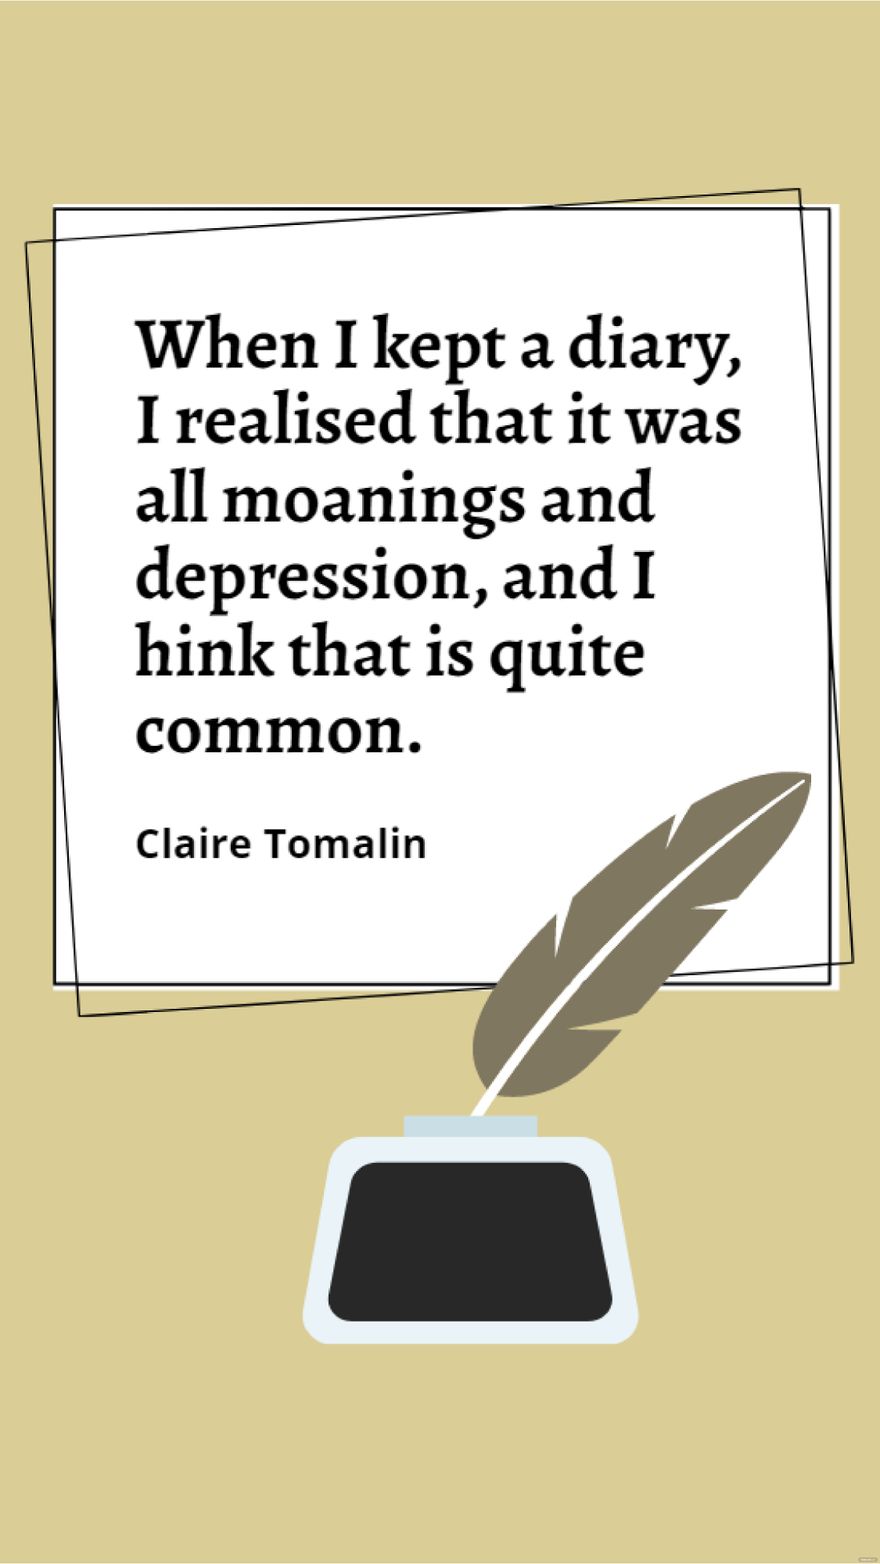 Claire Tomalin - When I kept a diary, I realised that it was all moanings and depression, and I think that is quite common.